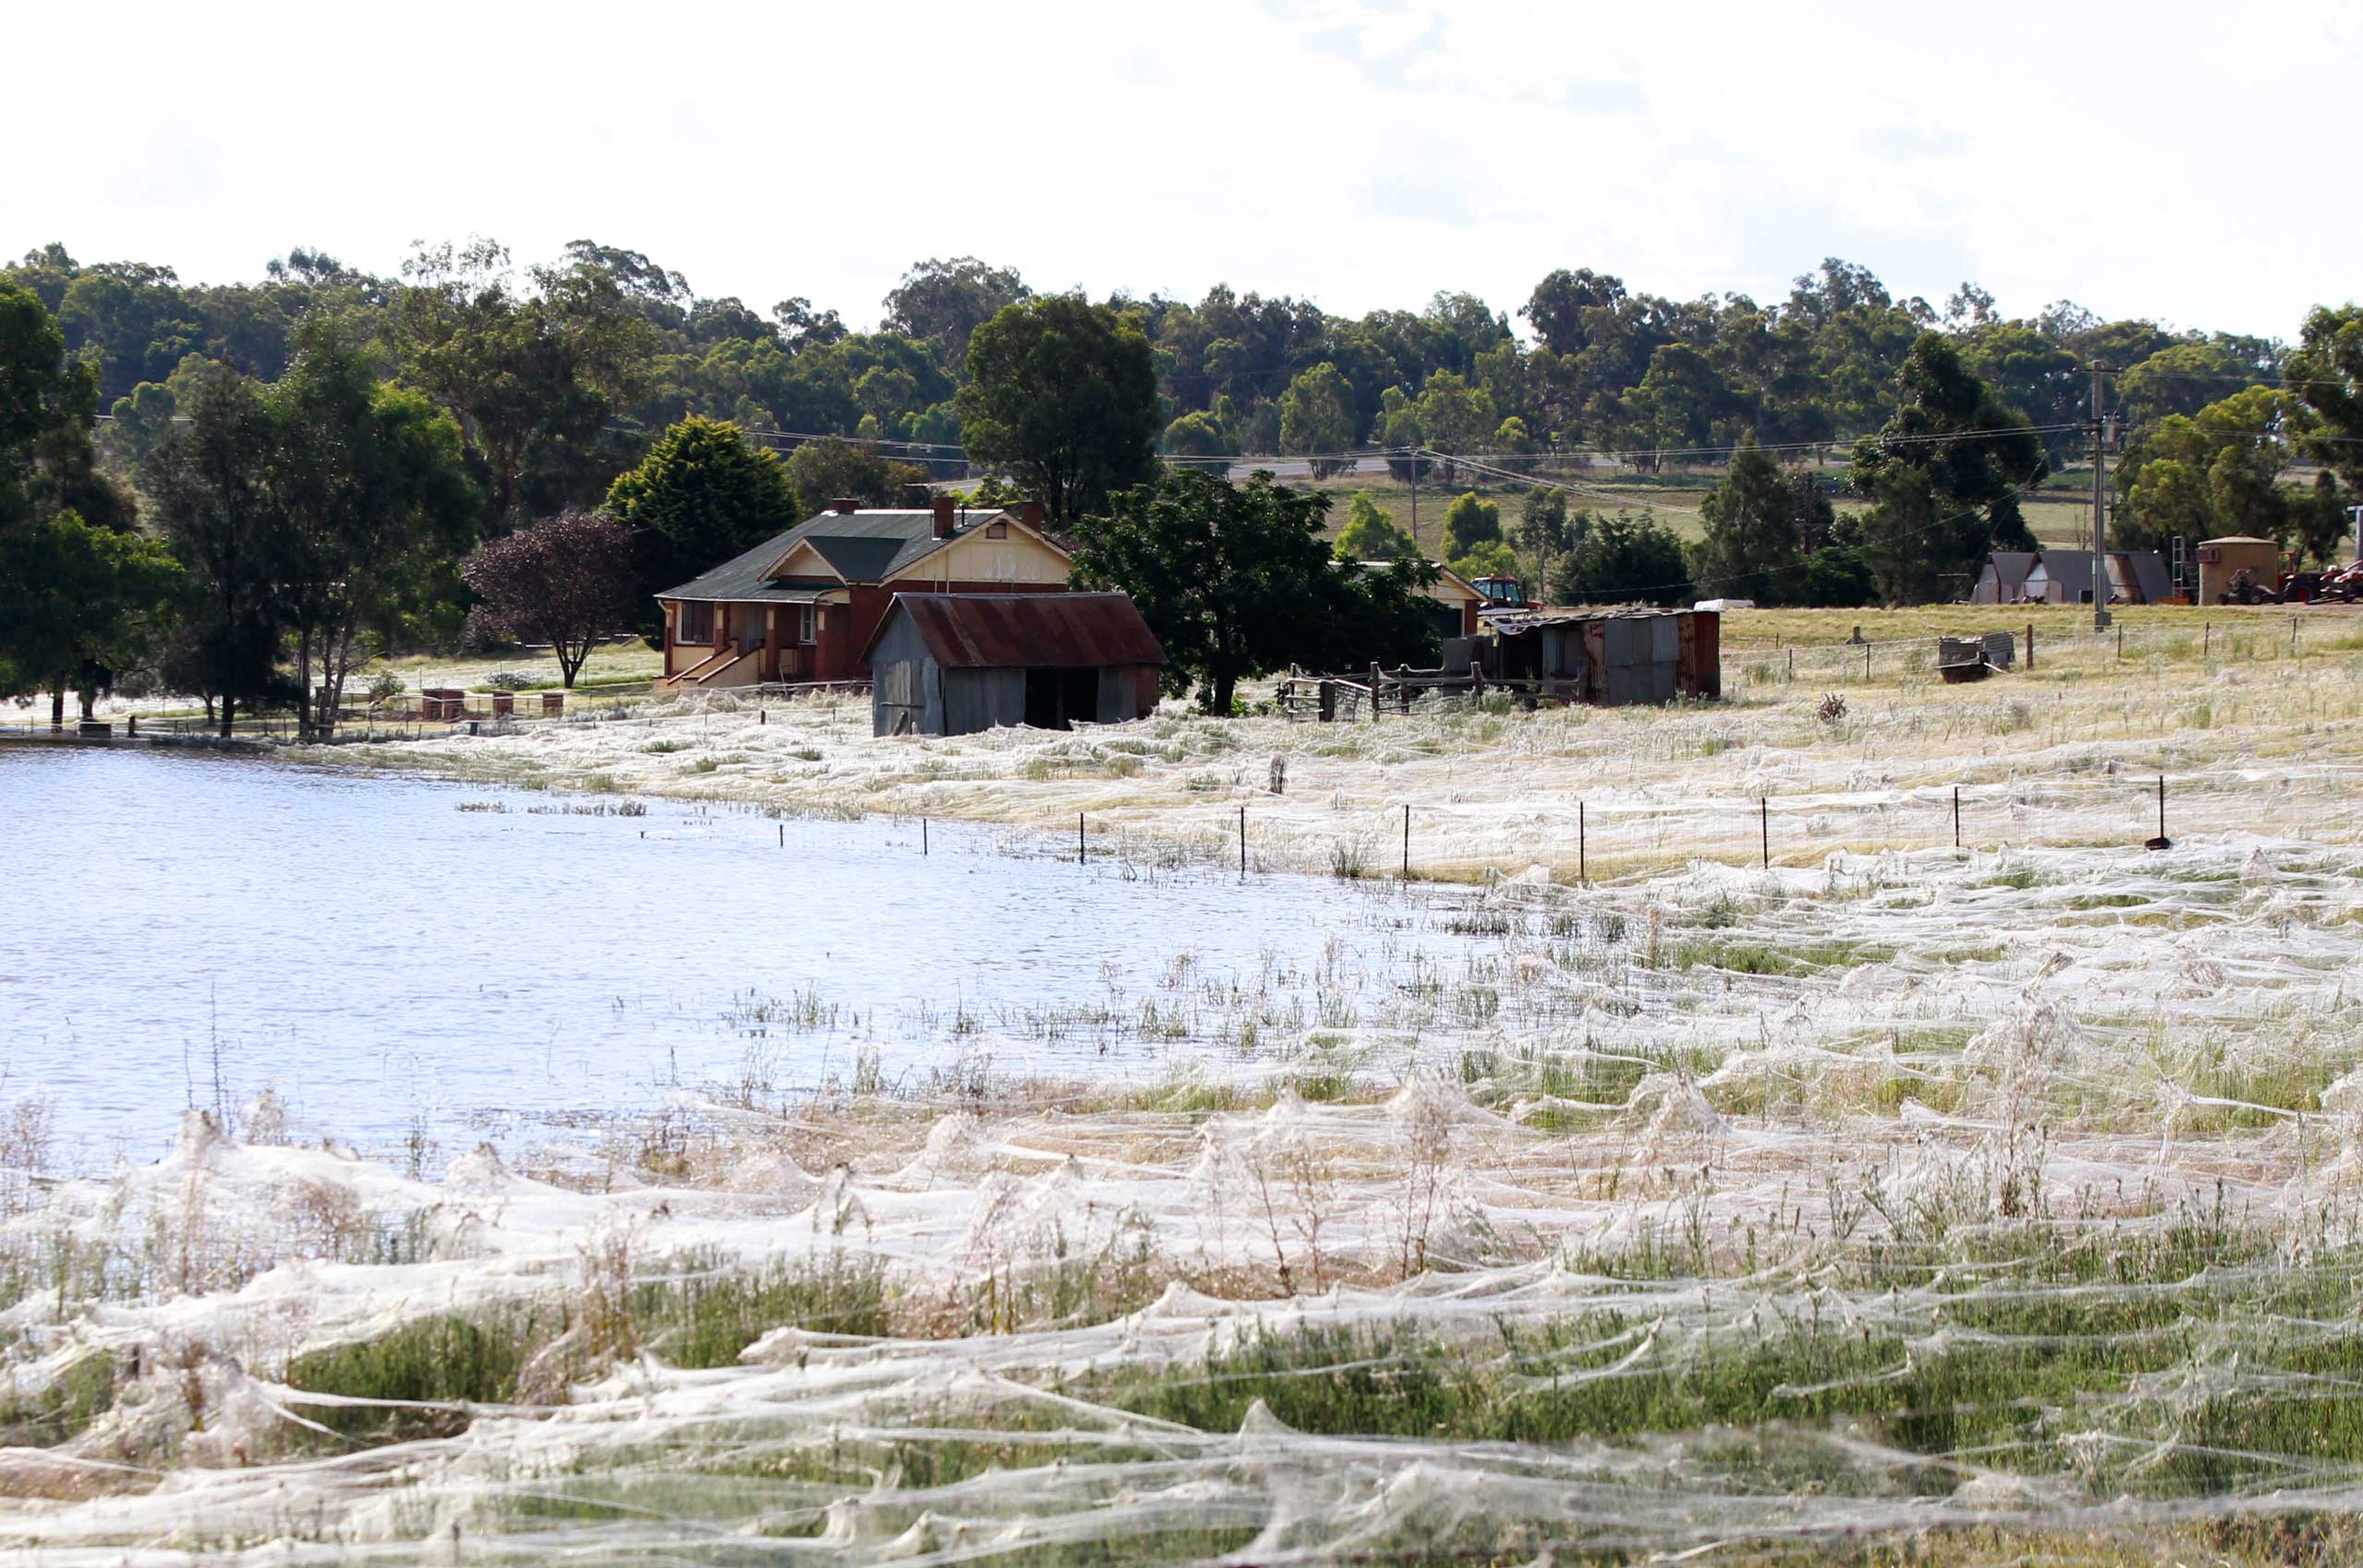 A house is surrounded by spiderwebs next to flood waters in Wagga Wagga, Australia.